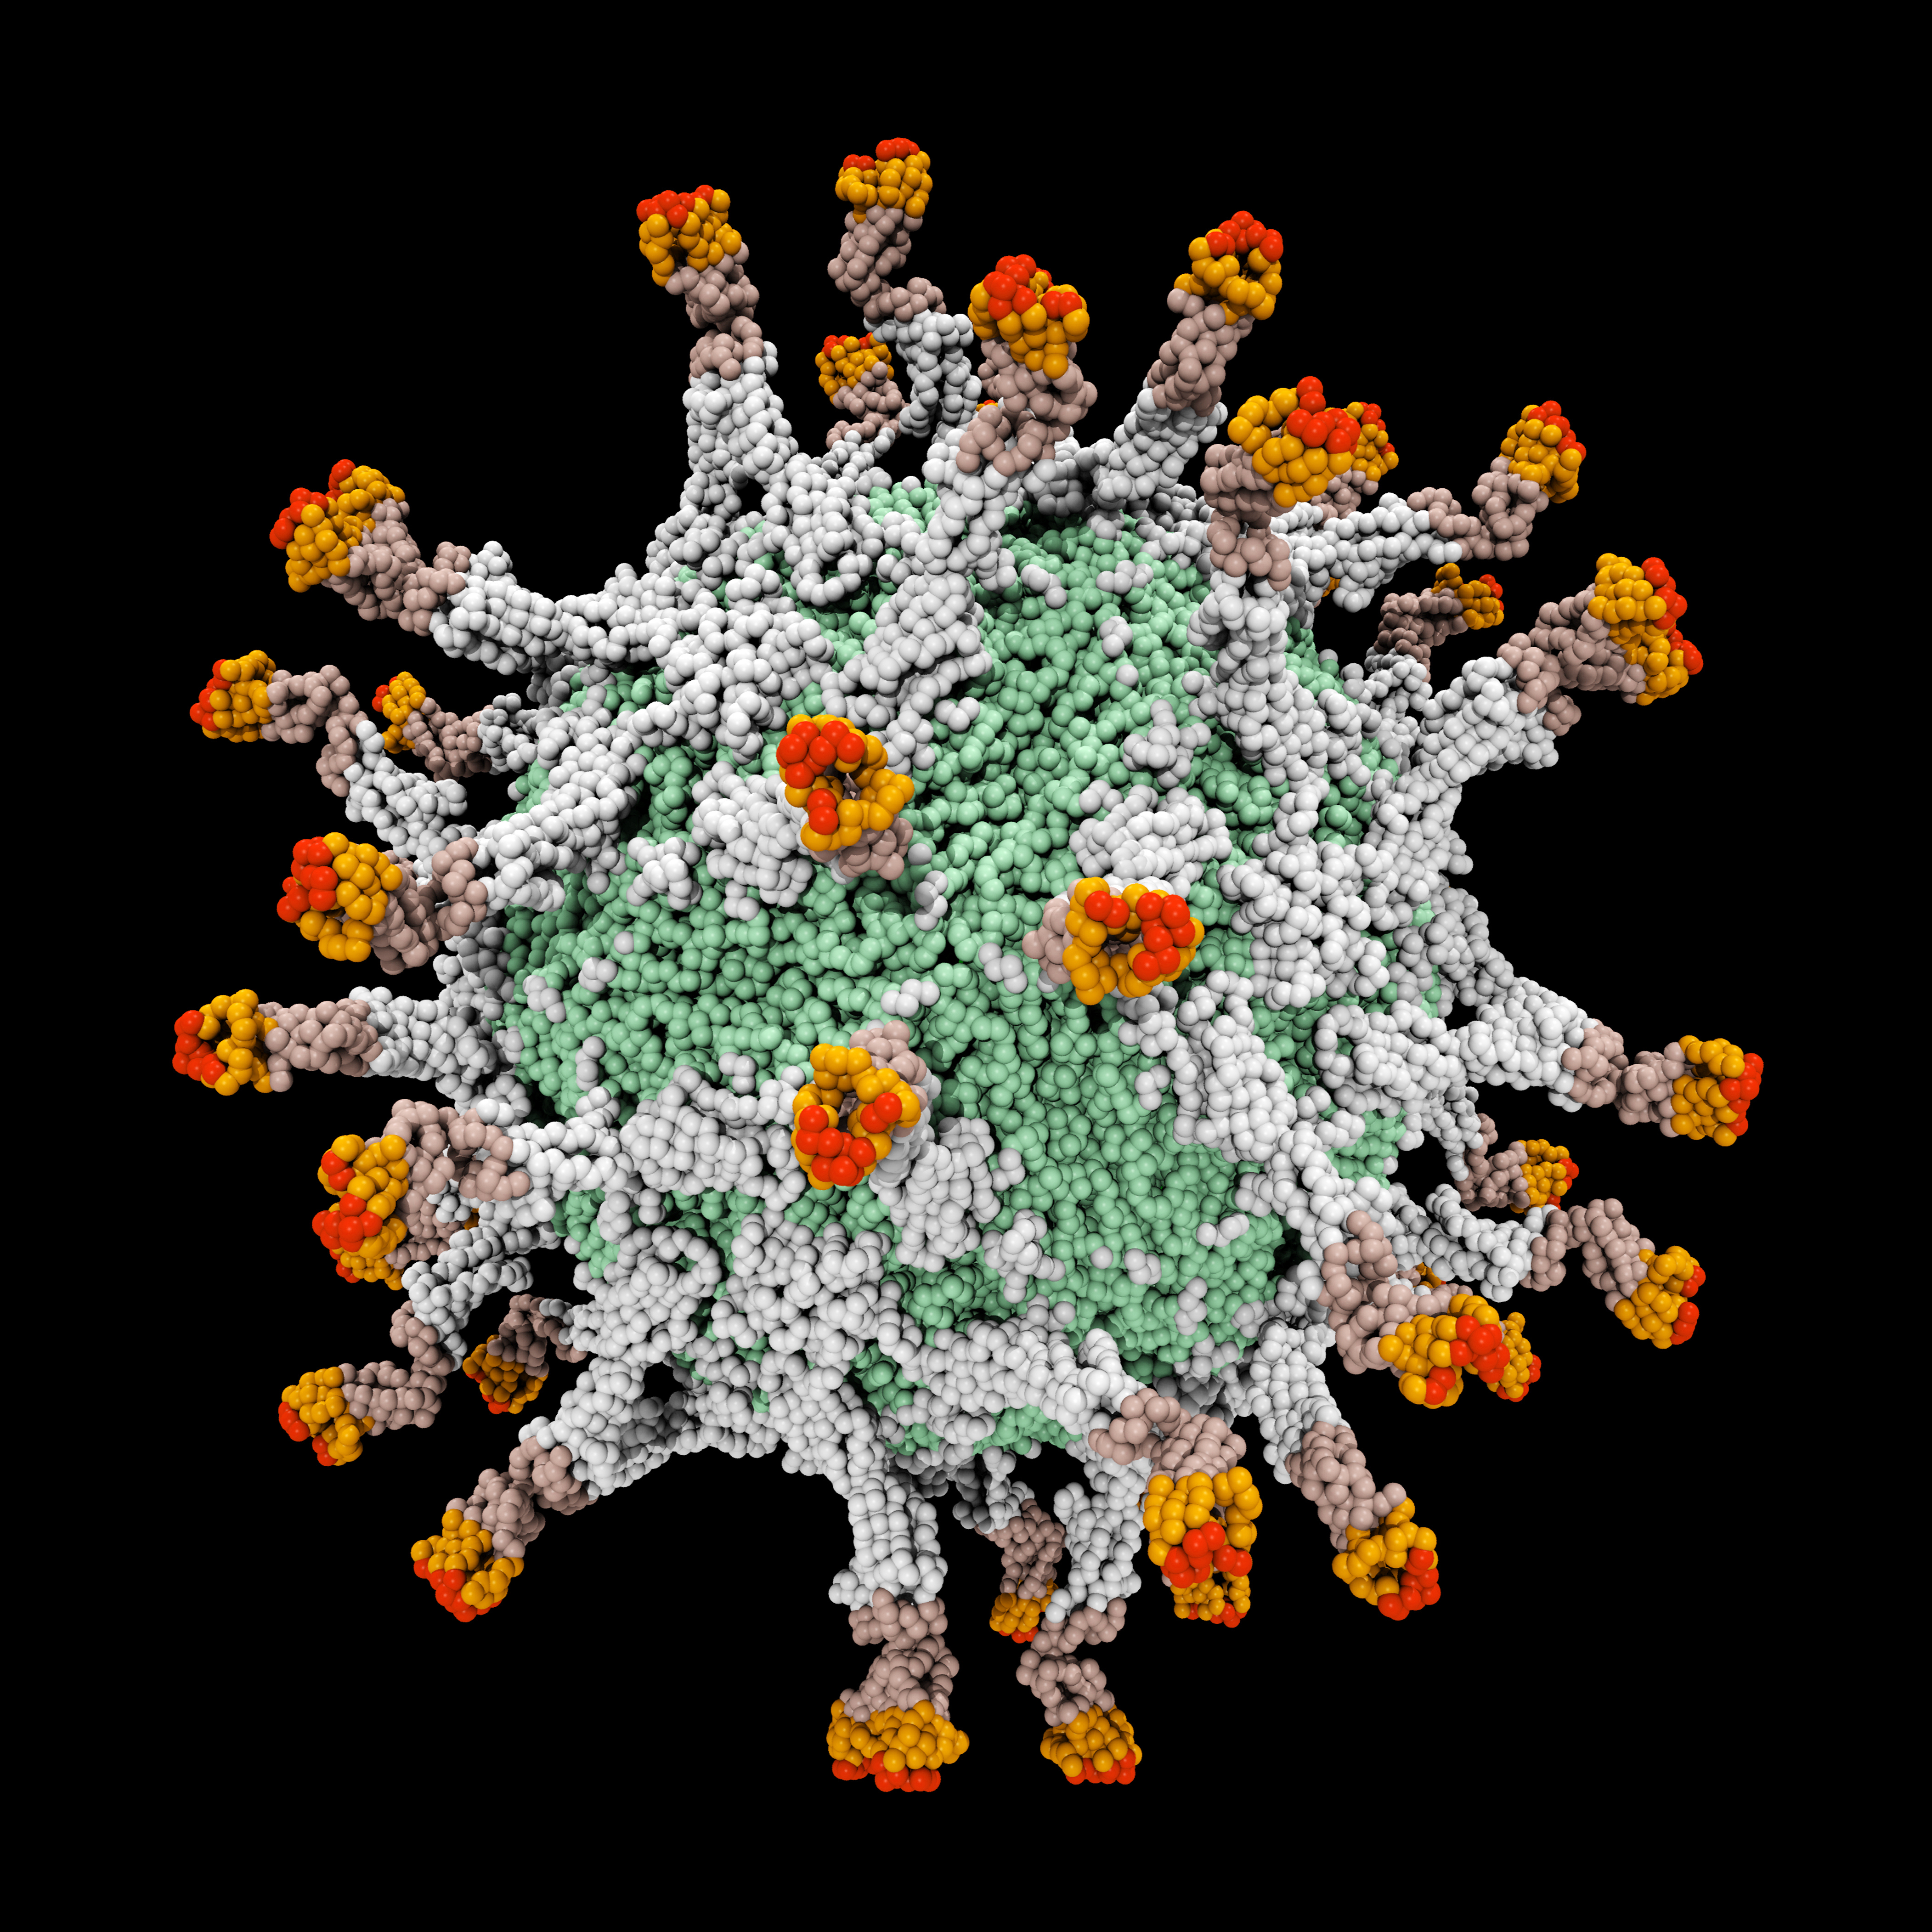 Goodbye to all that: Computer-generated model of a poliovirus (Calysta Images ;Getty Images/Tetra images RF)